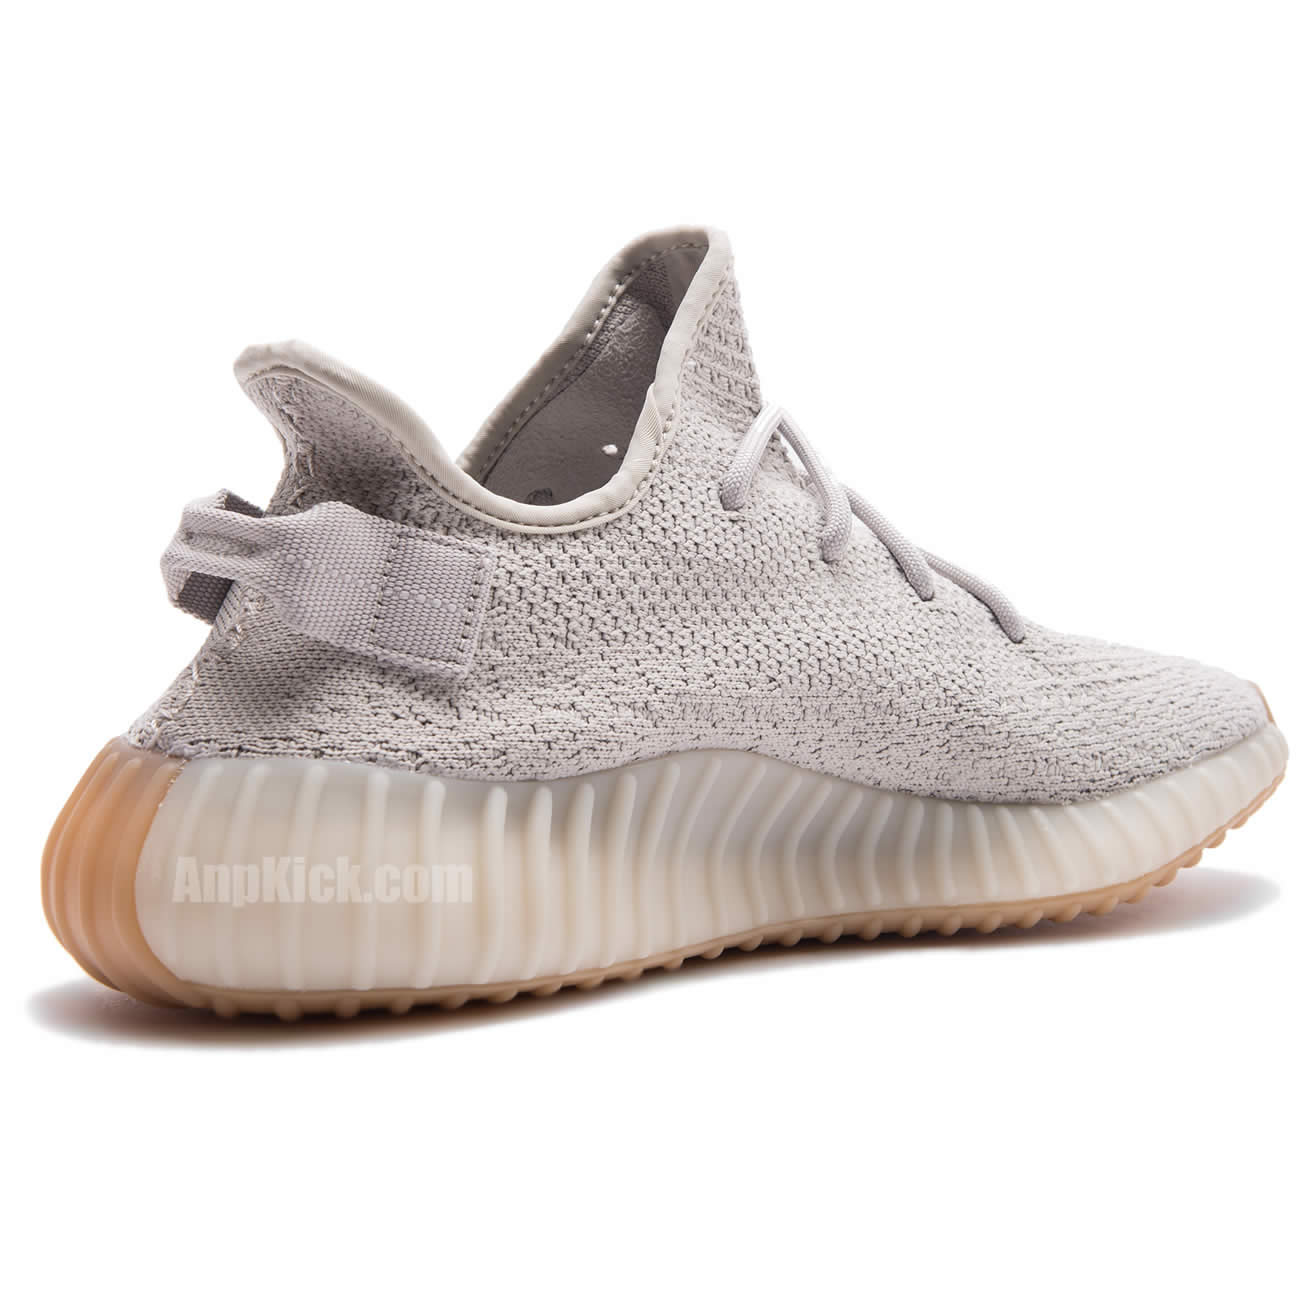 Yeezy Boost 350 V2 Sesame Price For Sale Outfit Release Date F99710